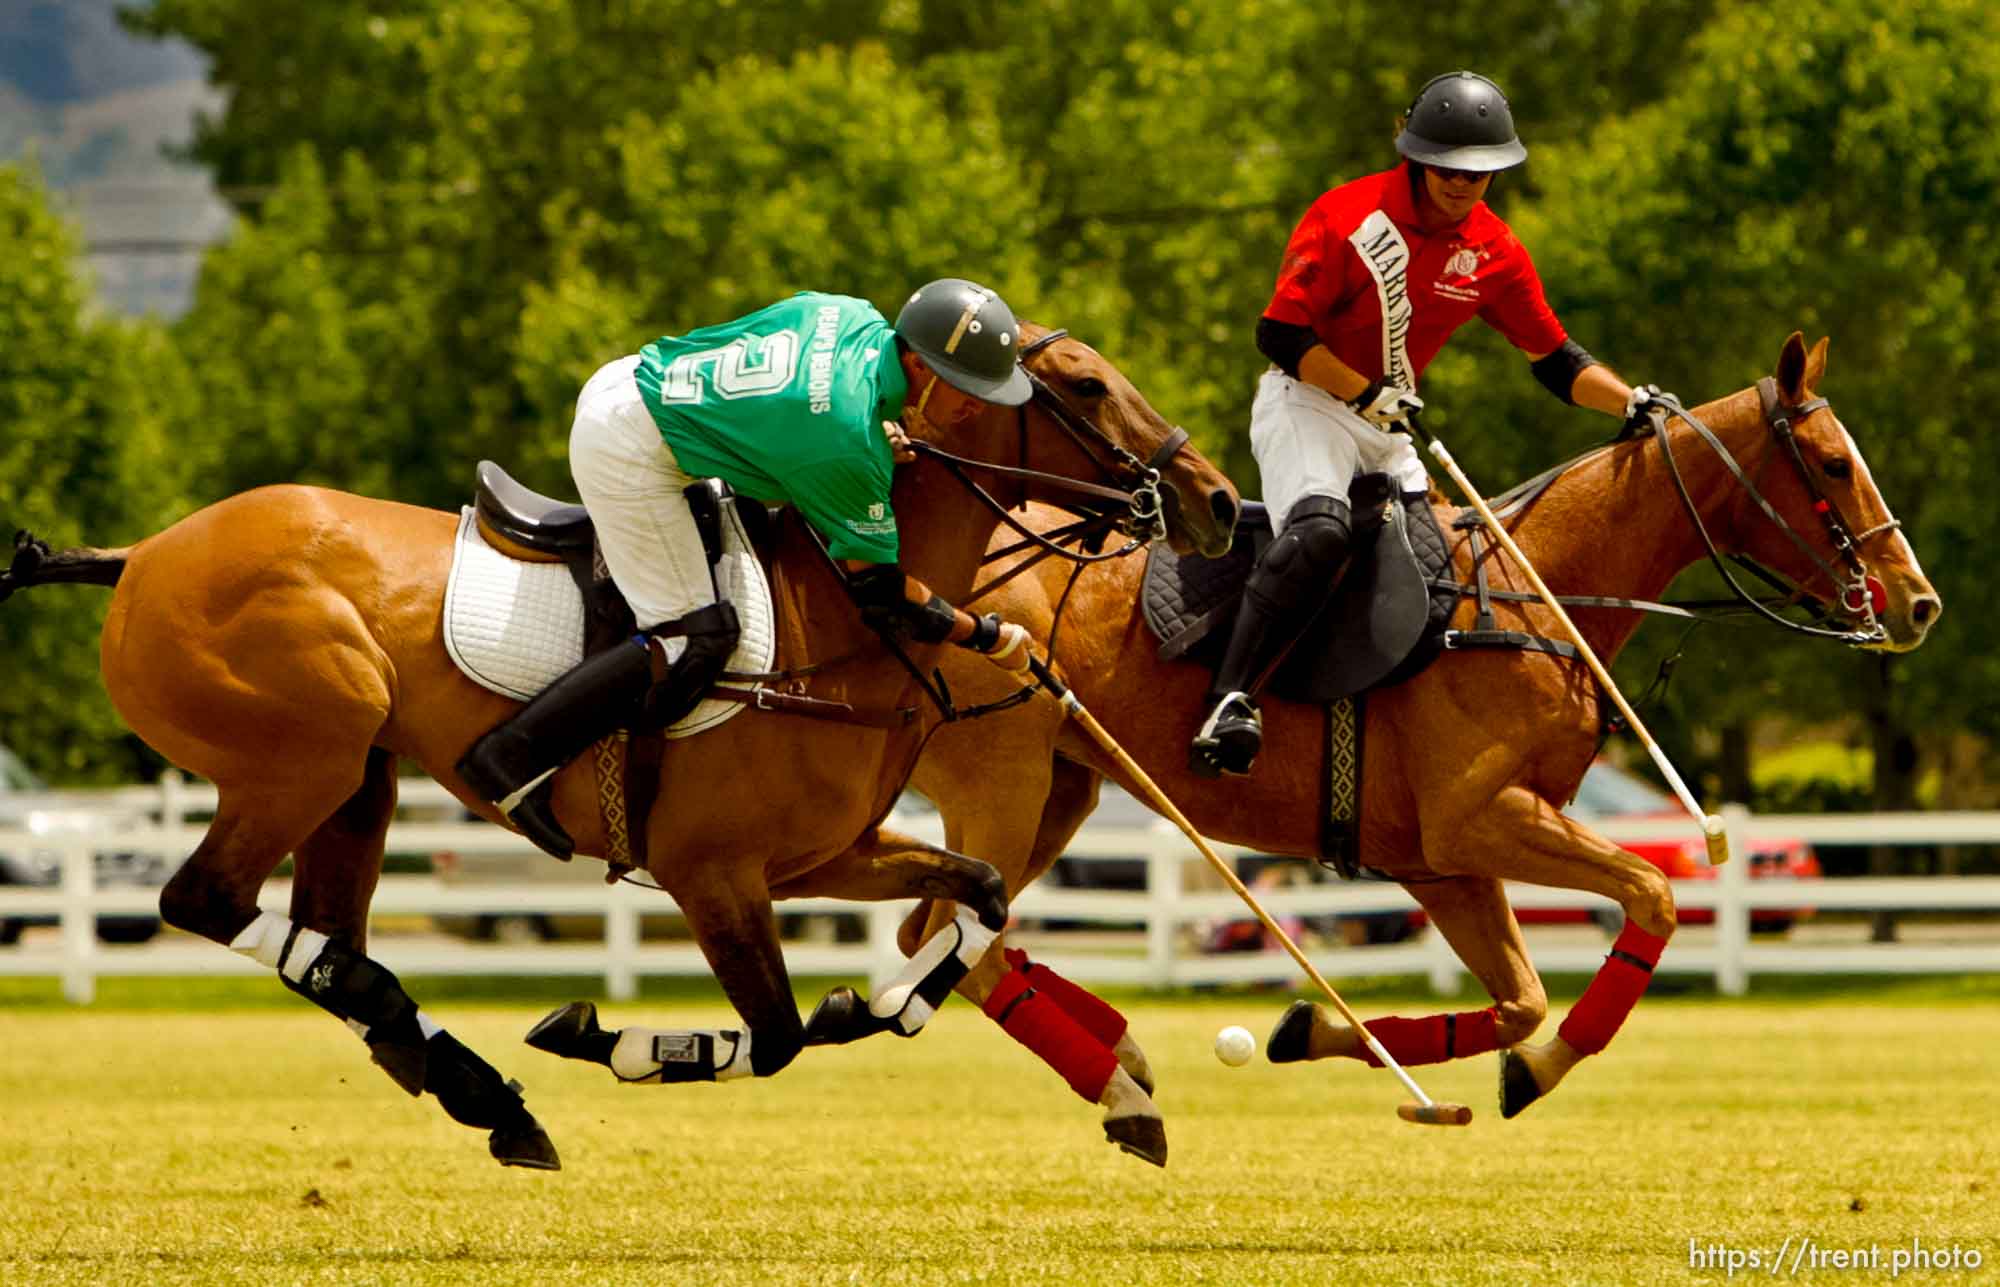 Pharmacy Cup Champagne Brunch & Polo Match